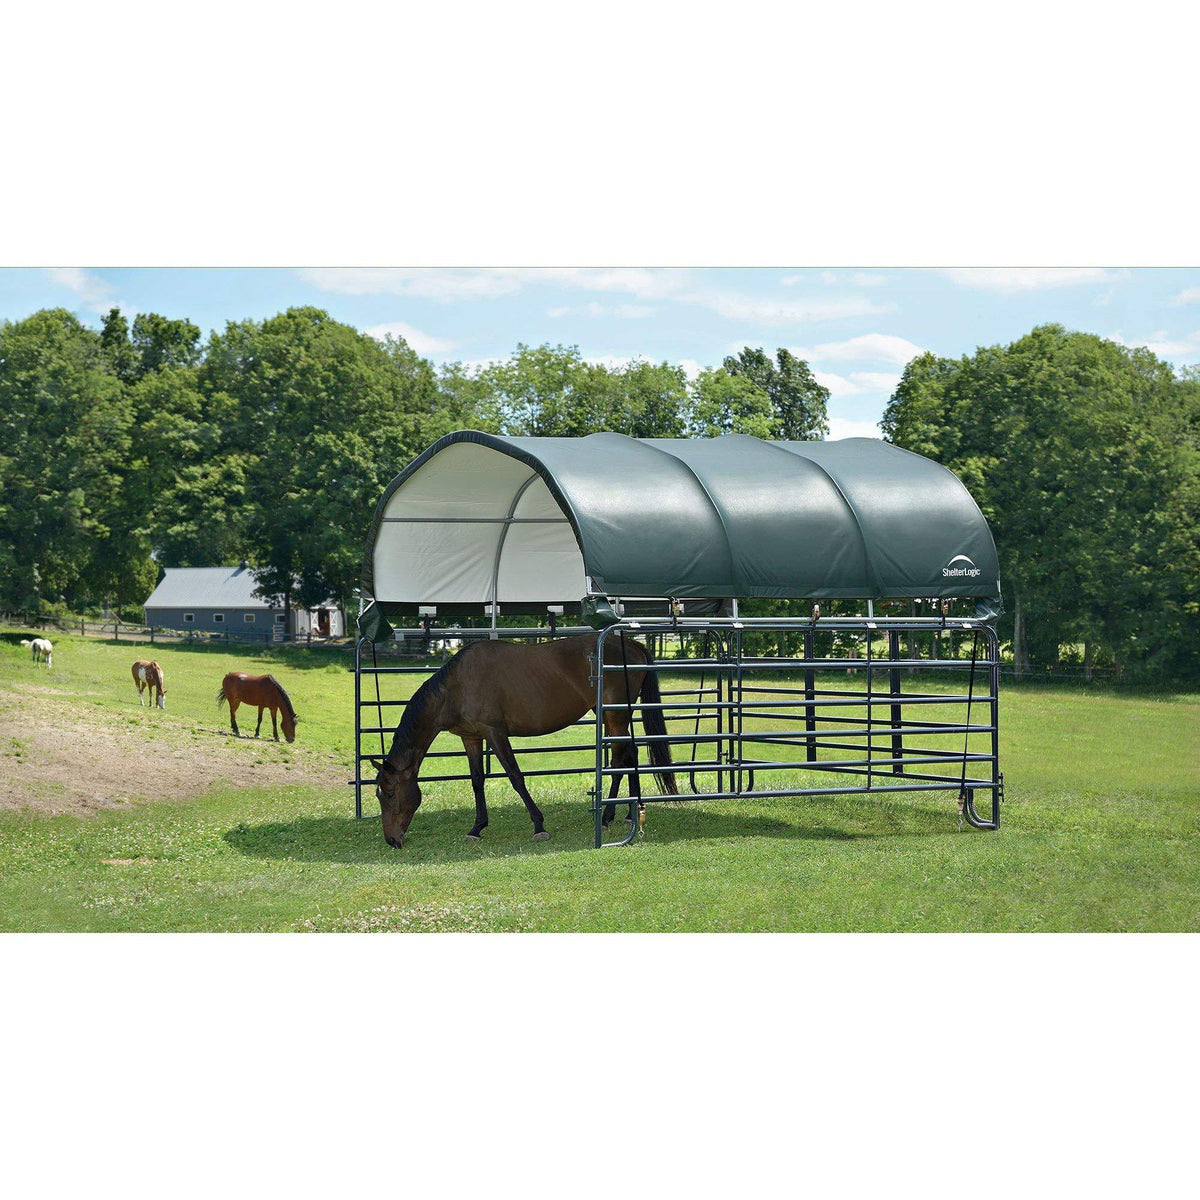 ShelterLogic Corral Shelter, Green, 12 x 12 (Corral Panels Not Included)